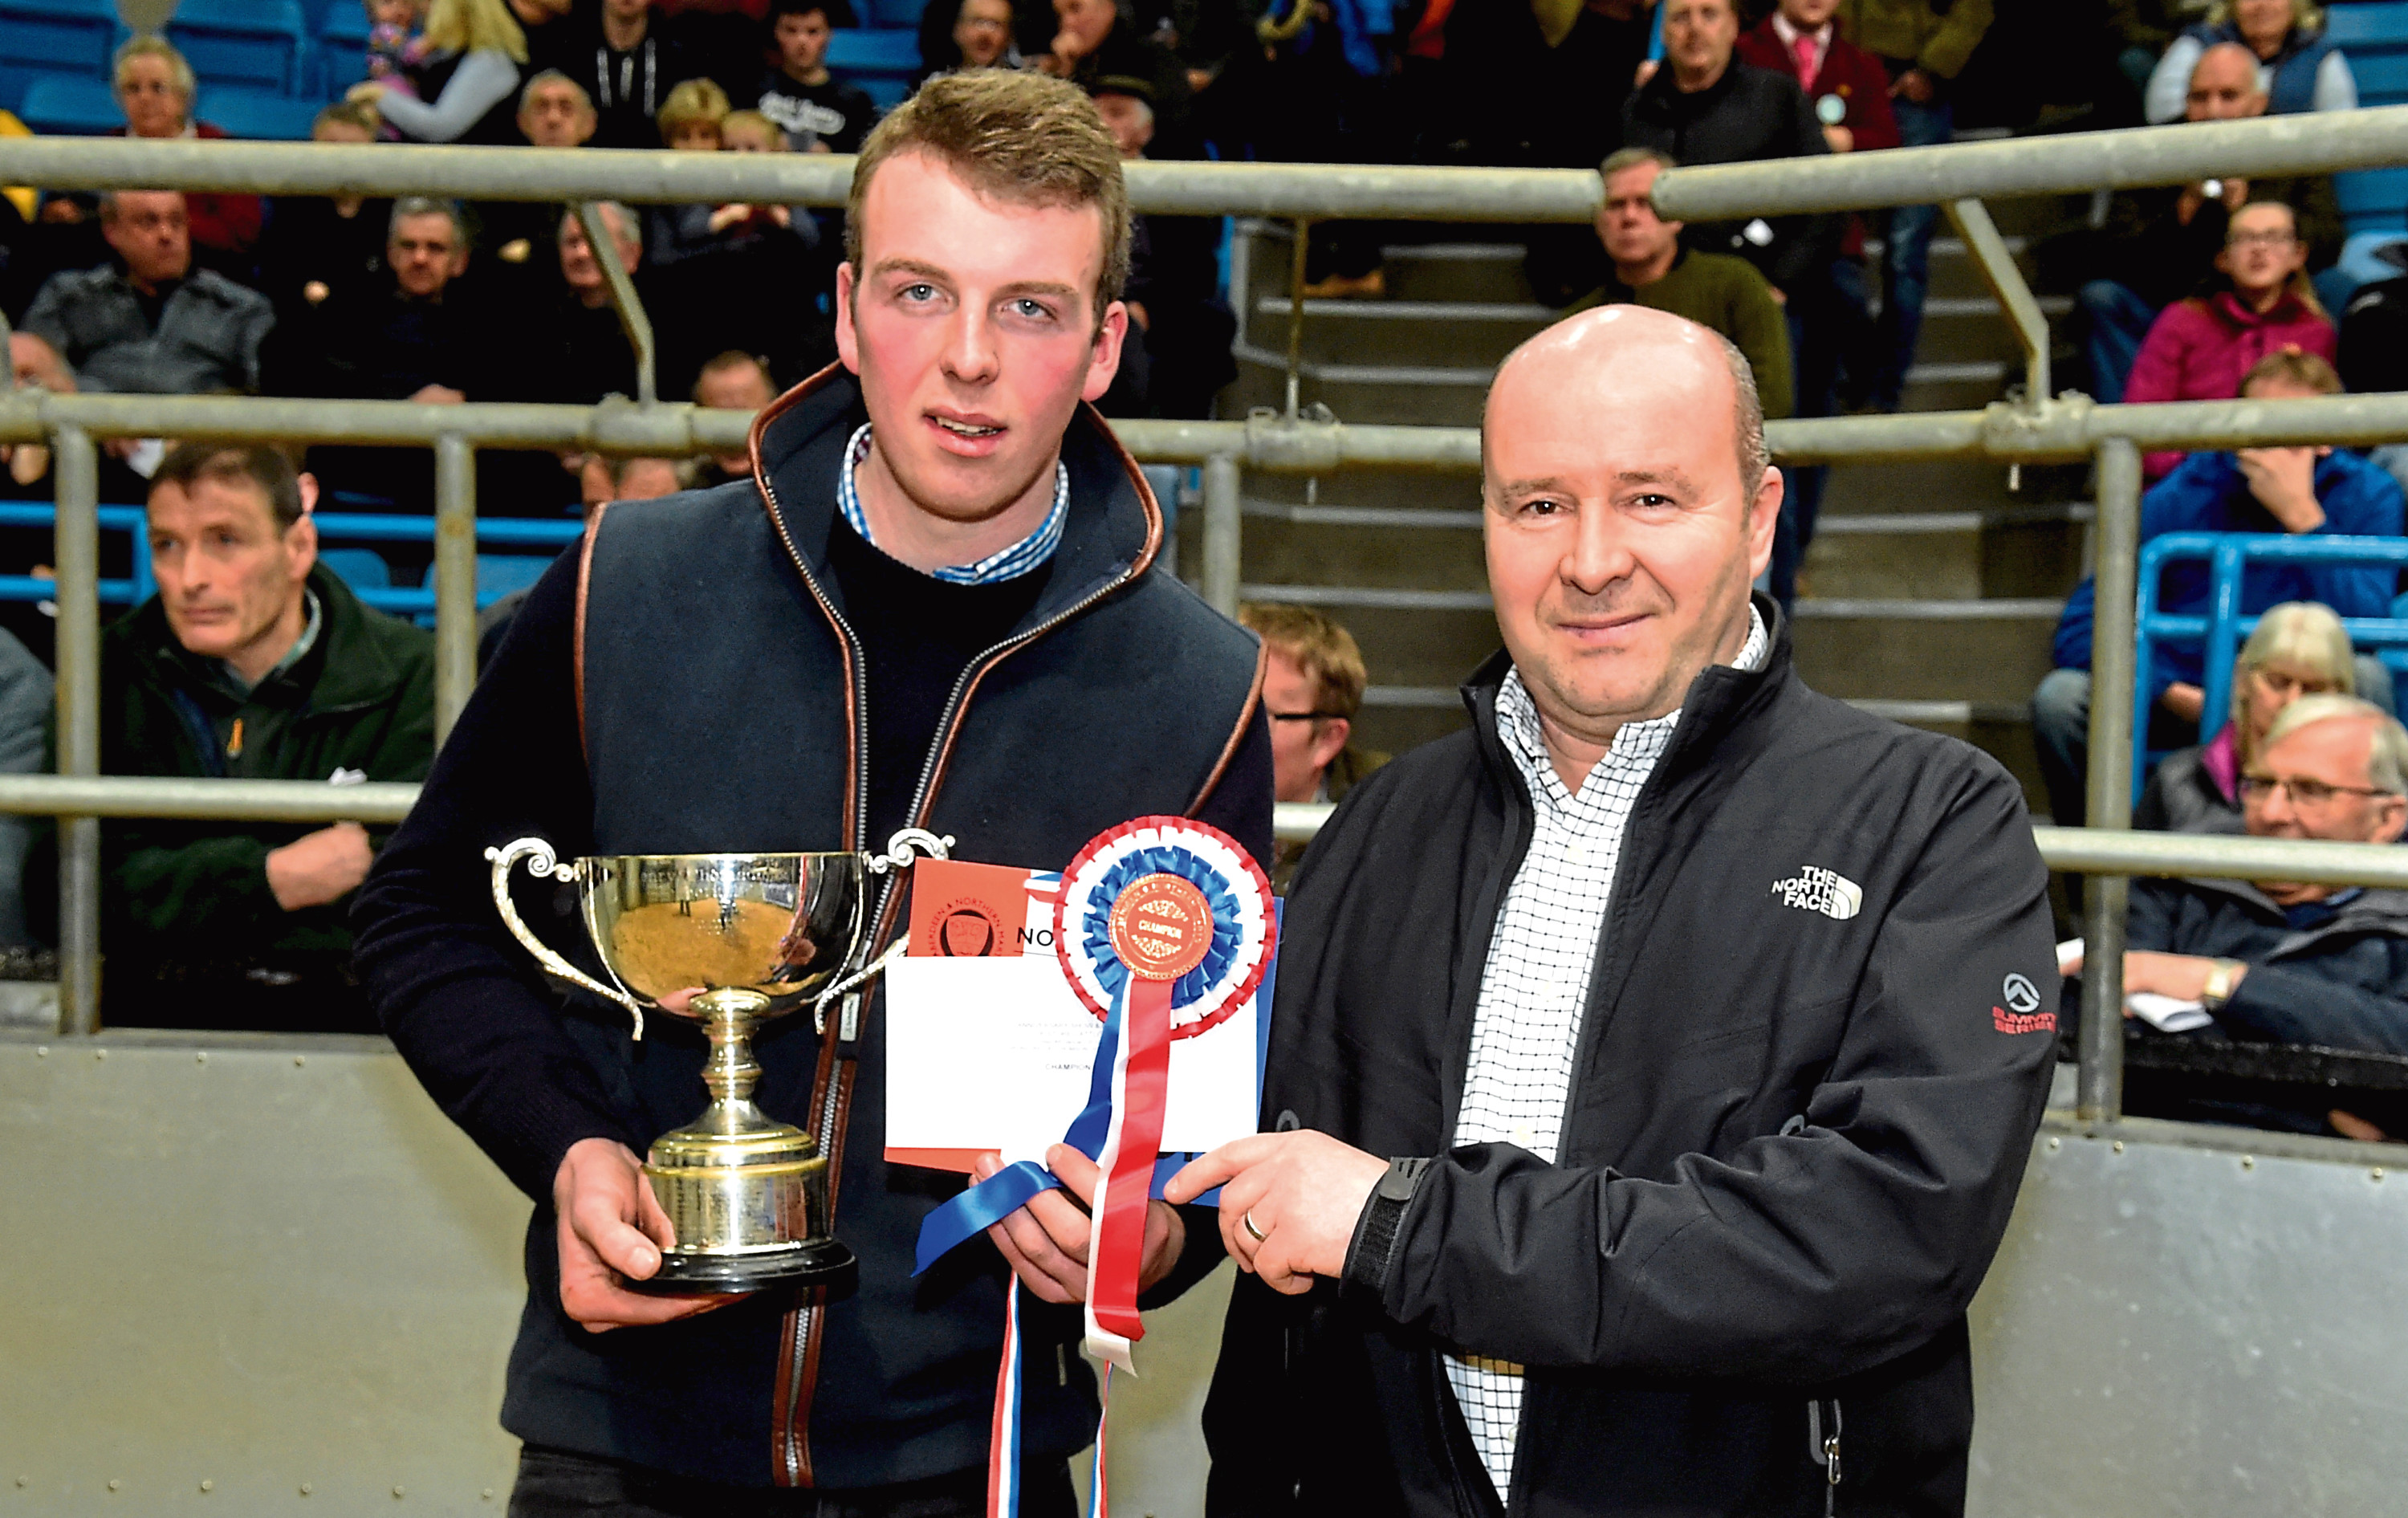 William Moir collects the overall champion trophy from show sponsor Eric Thomson.